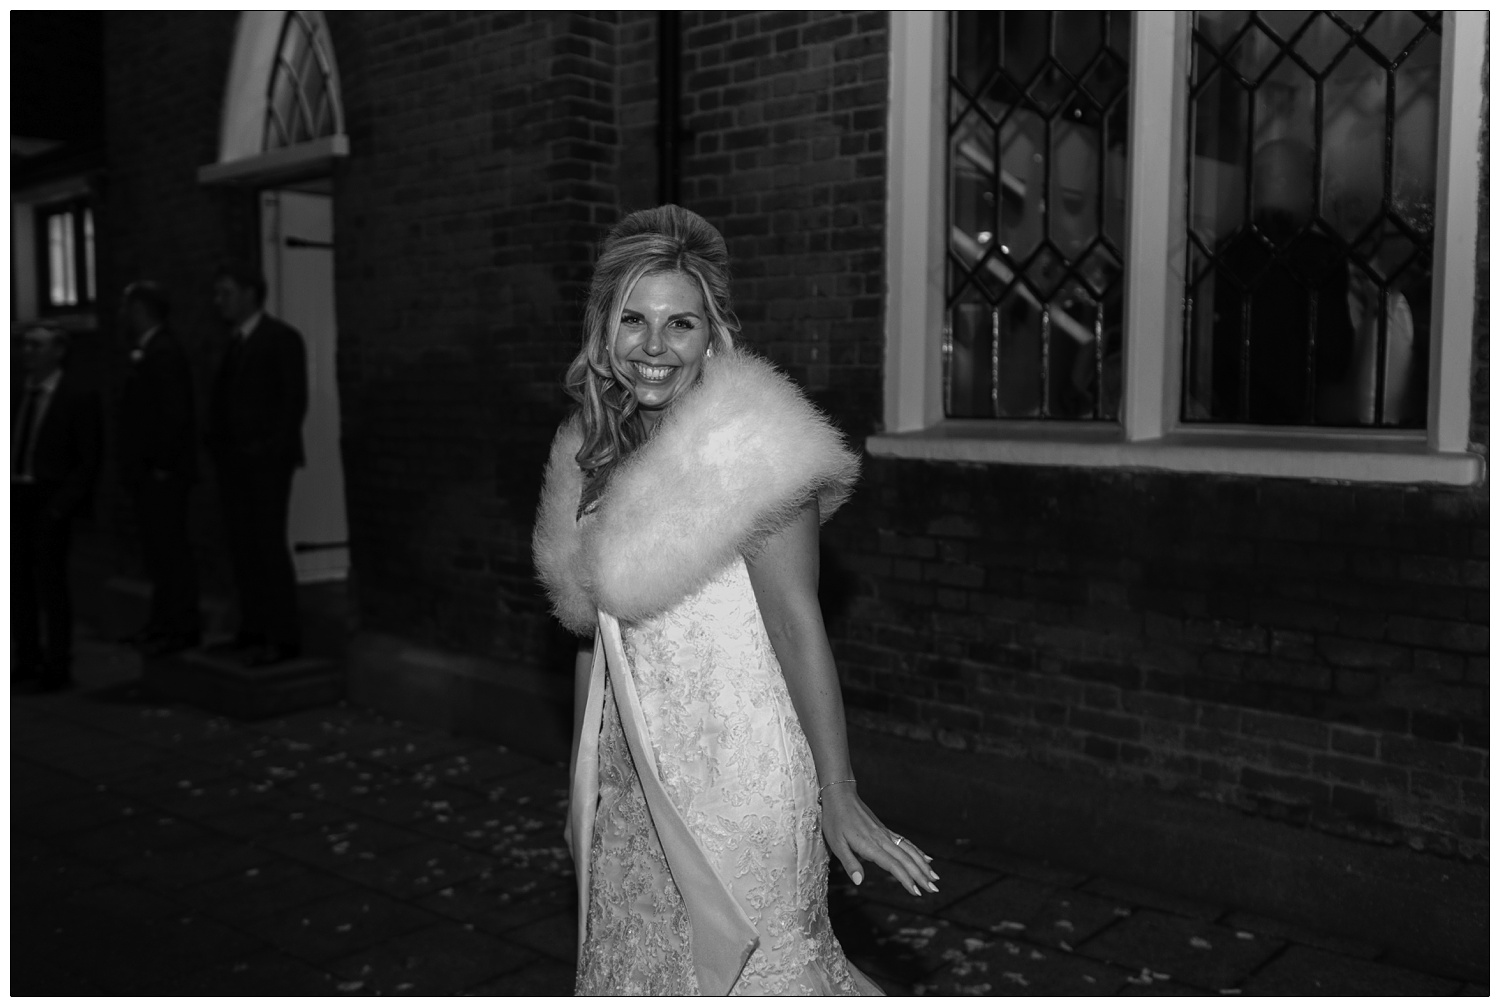 The bride at the end of the wedding day outside the Old Parish Rooms